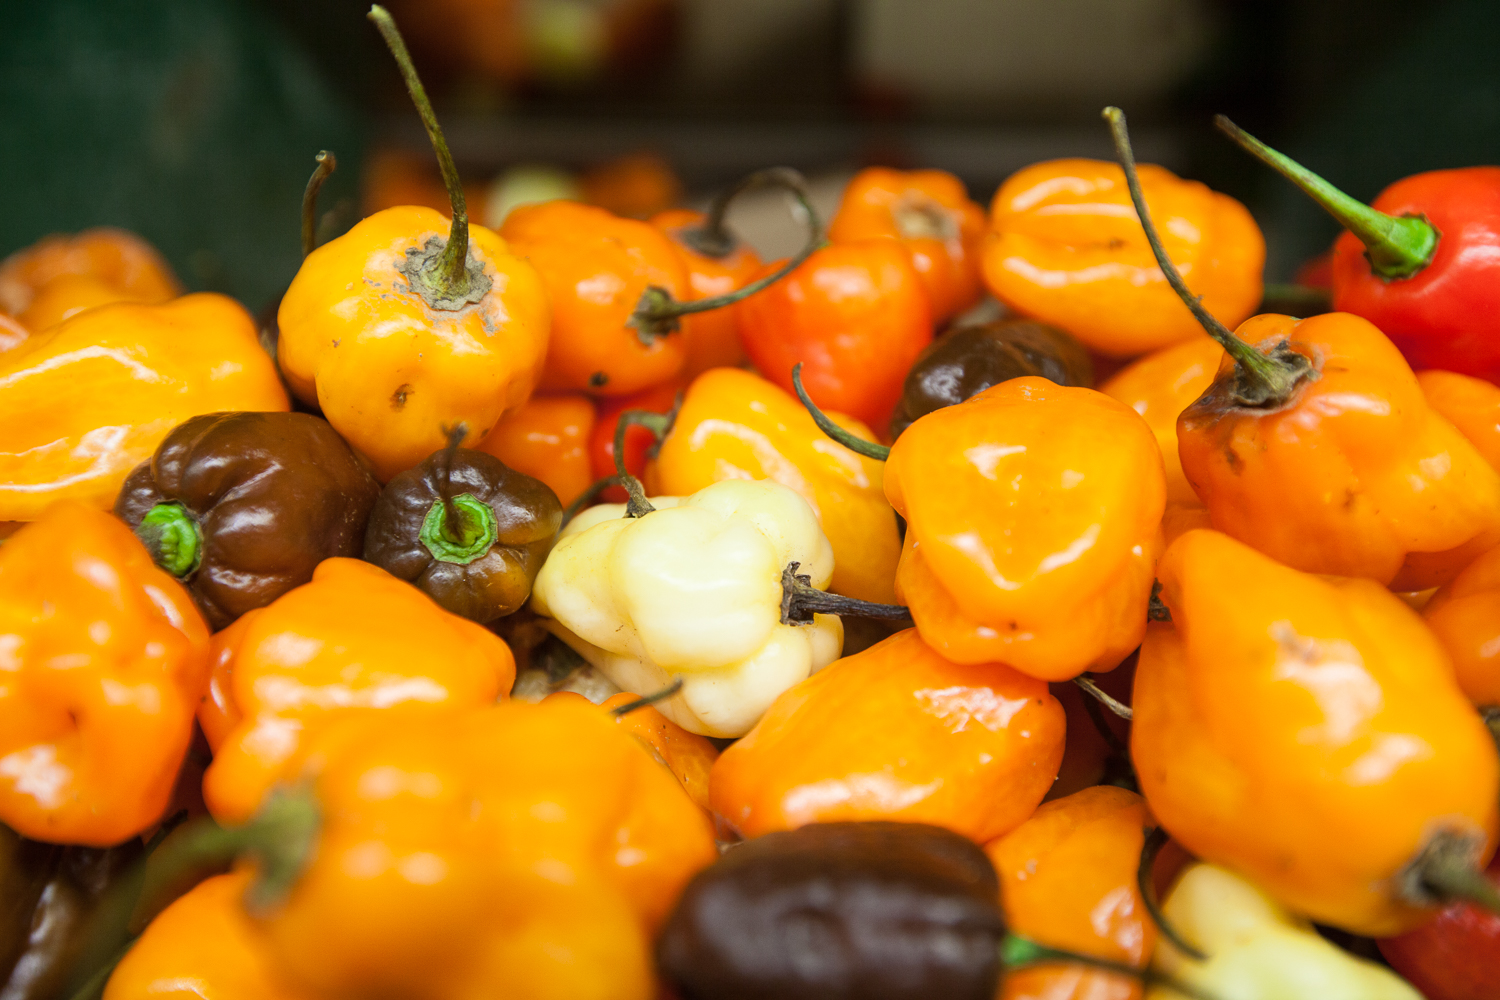 peppers from Mana Foods Produce Department